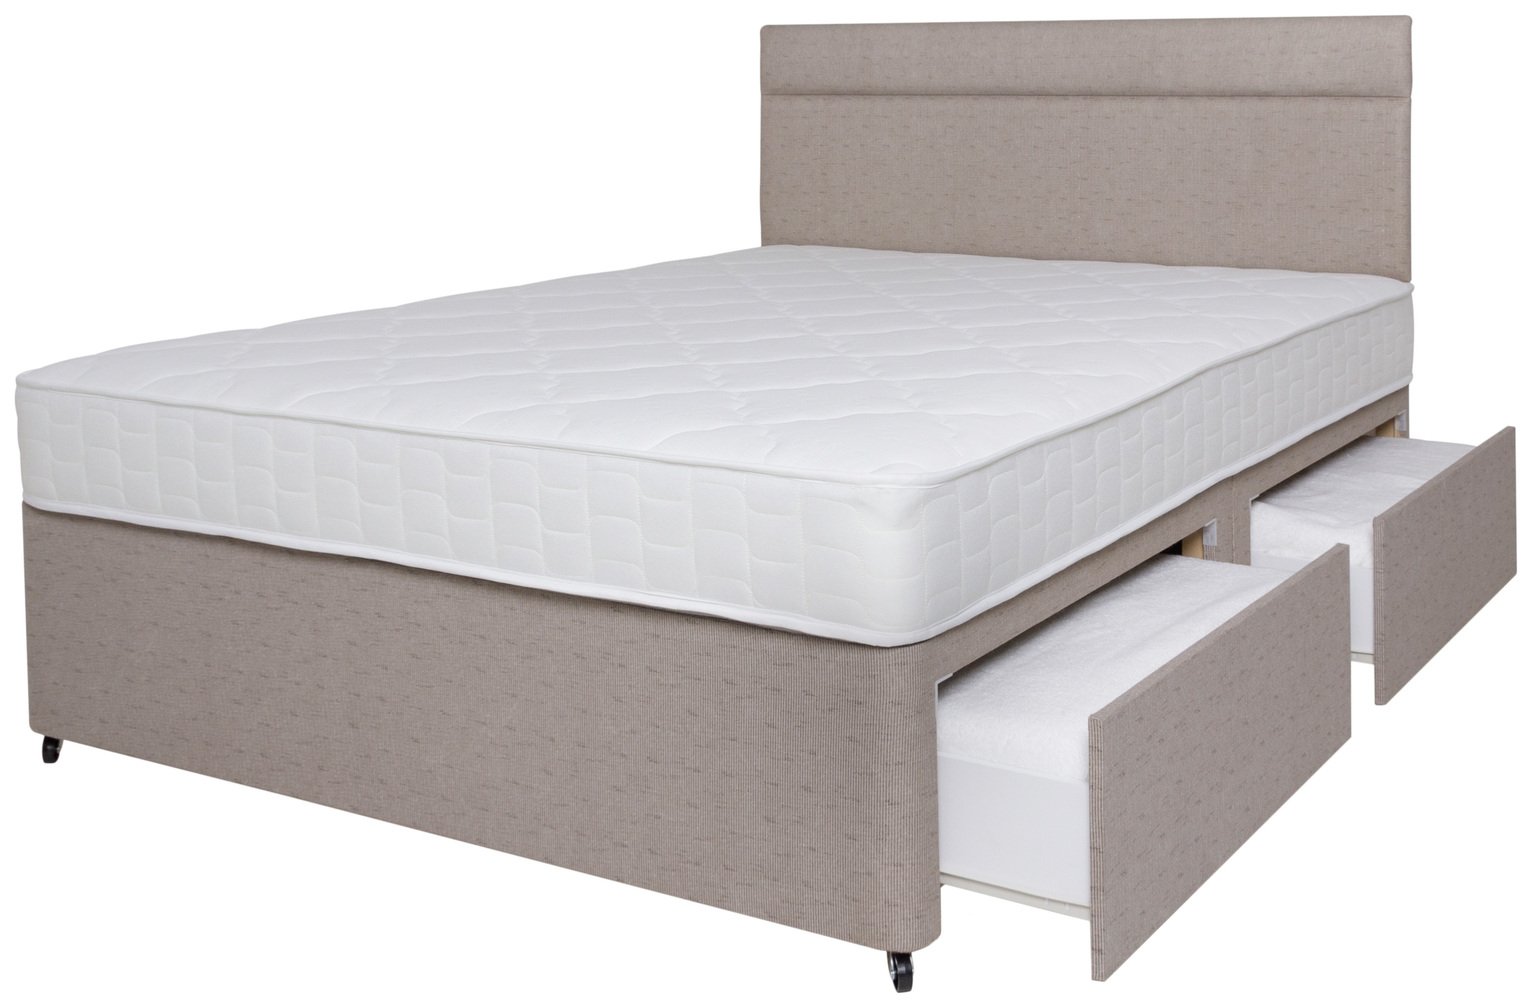 Best Collection of 90+ Inspiring airsprung bower mattress review You Won't Be Disappointed